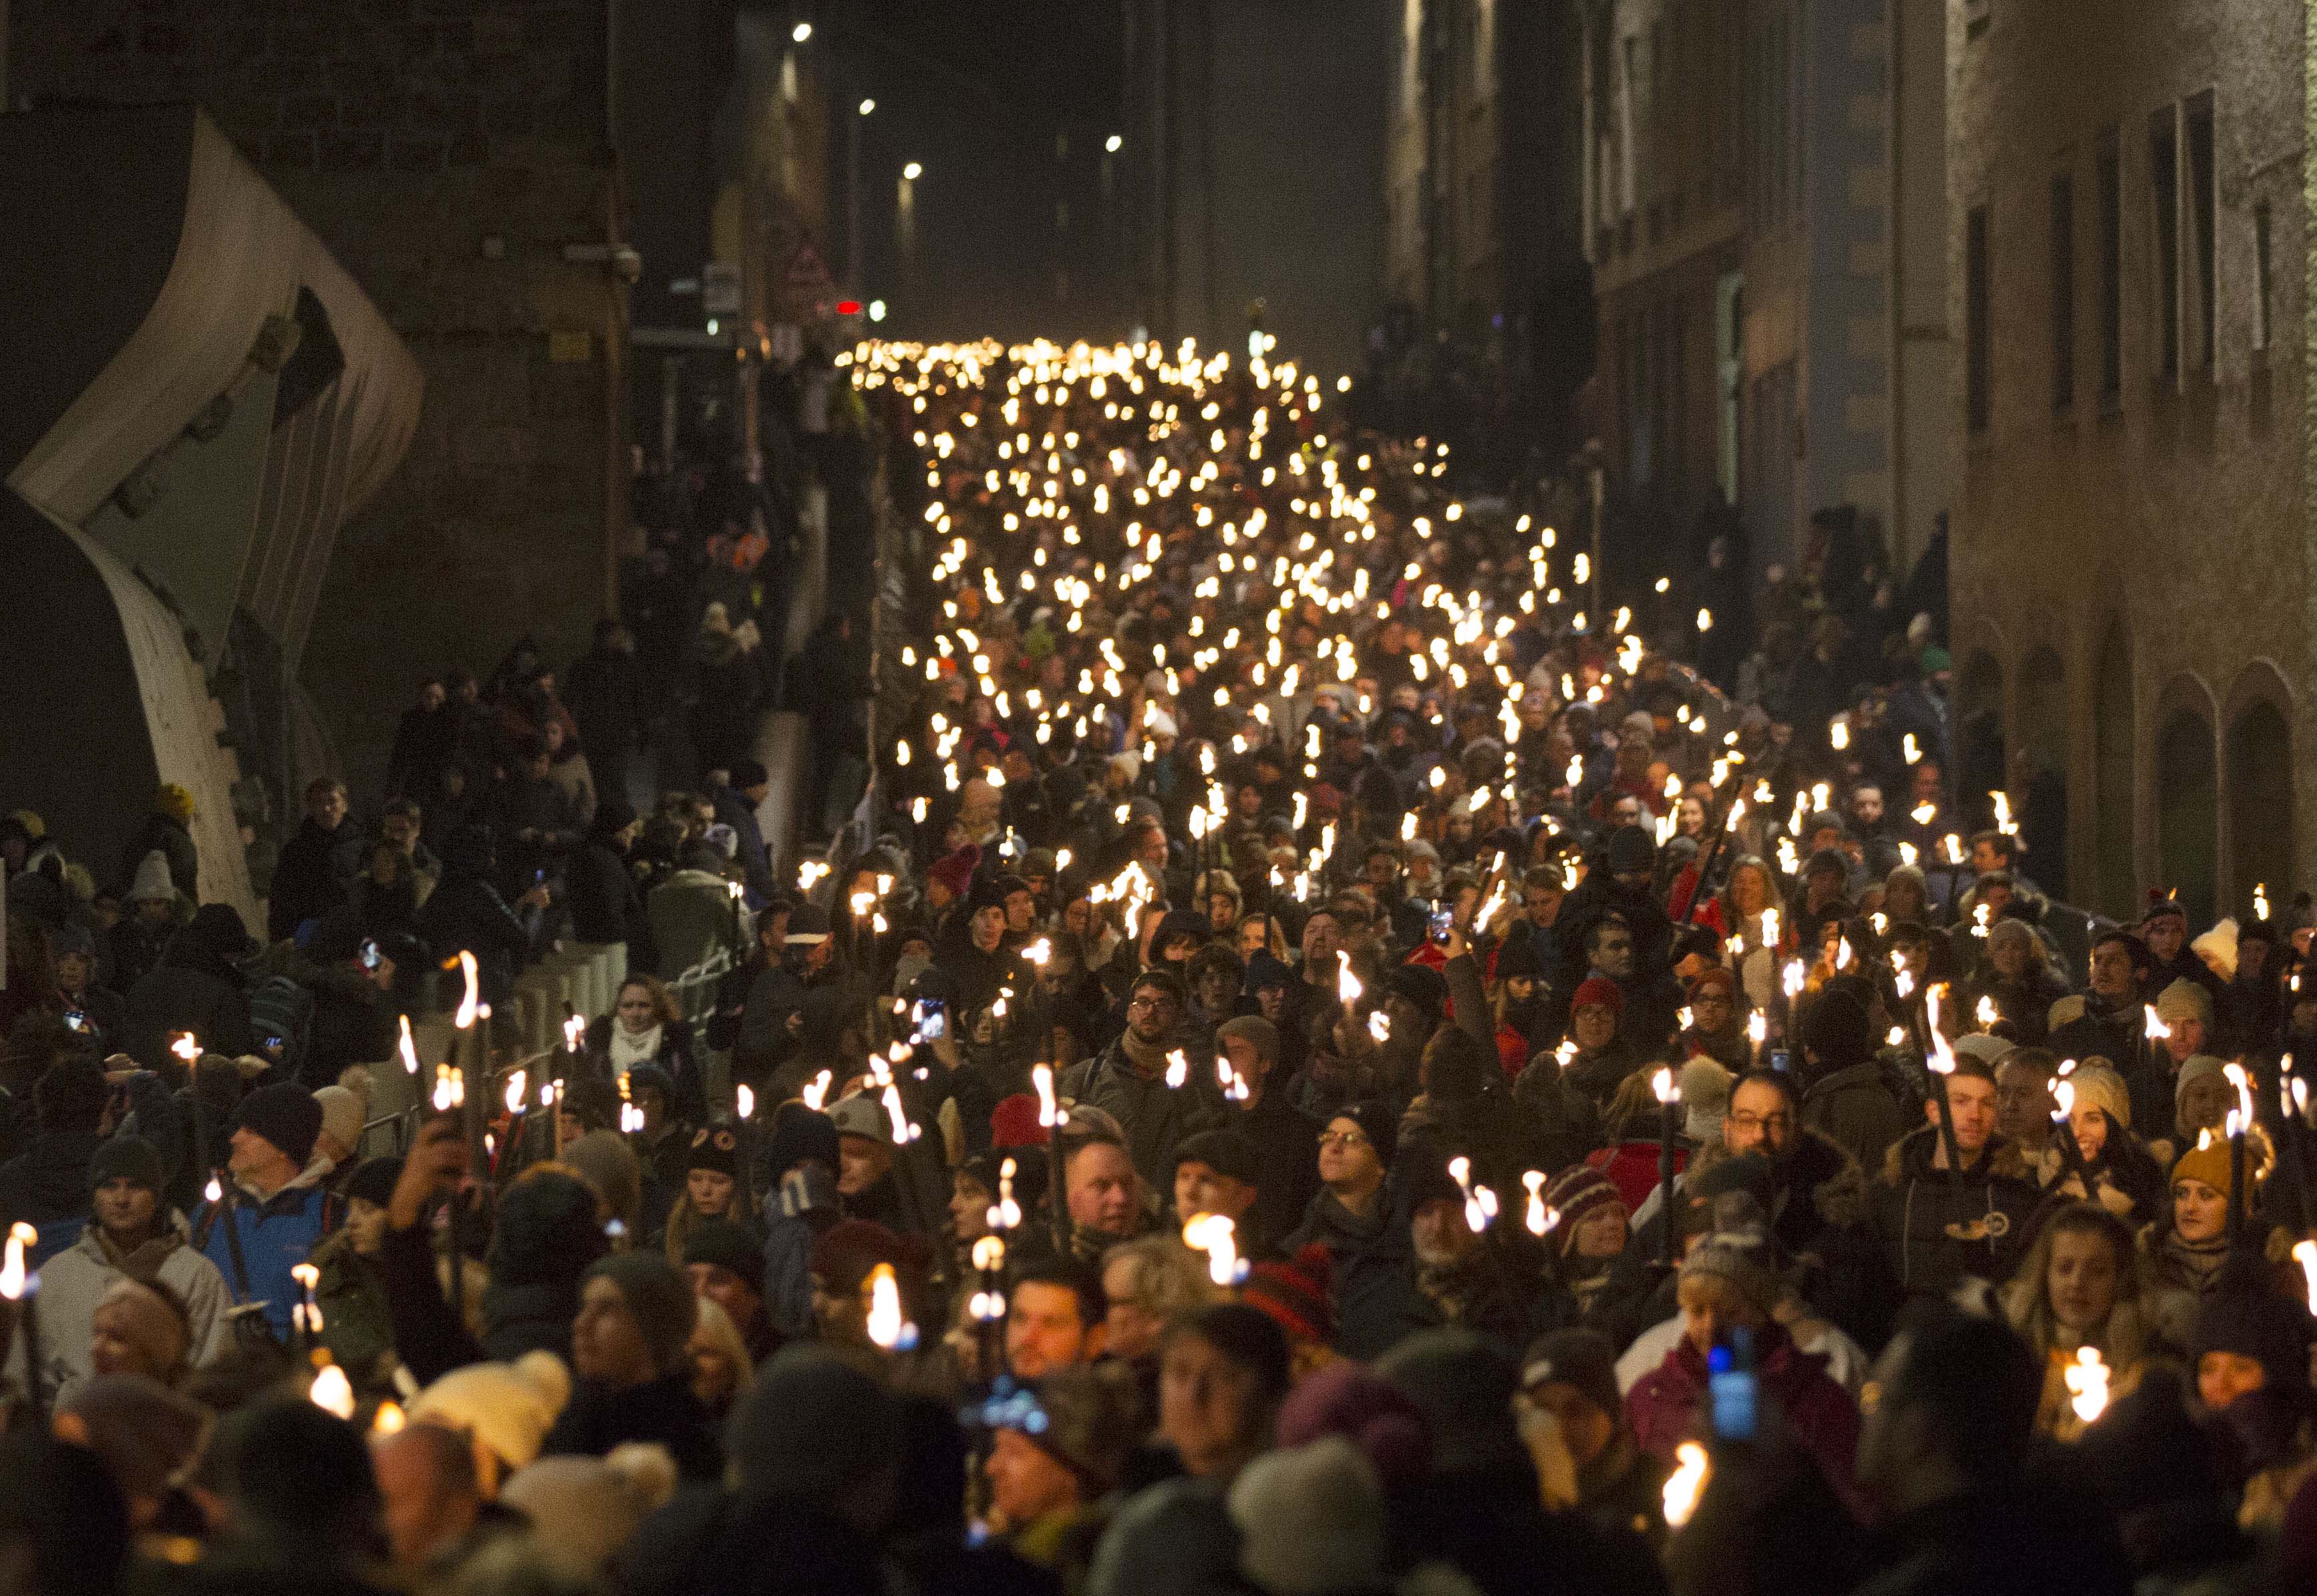 Torchlight Procession To Return to Four Day Hogmanay 2023/2024